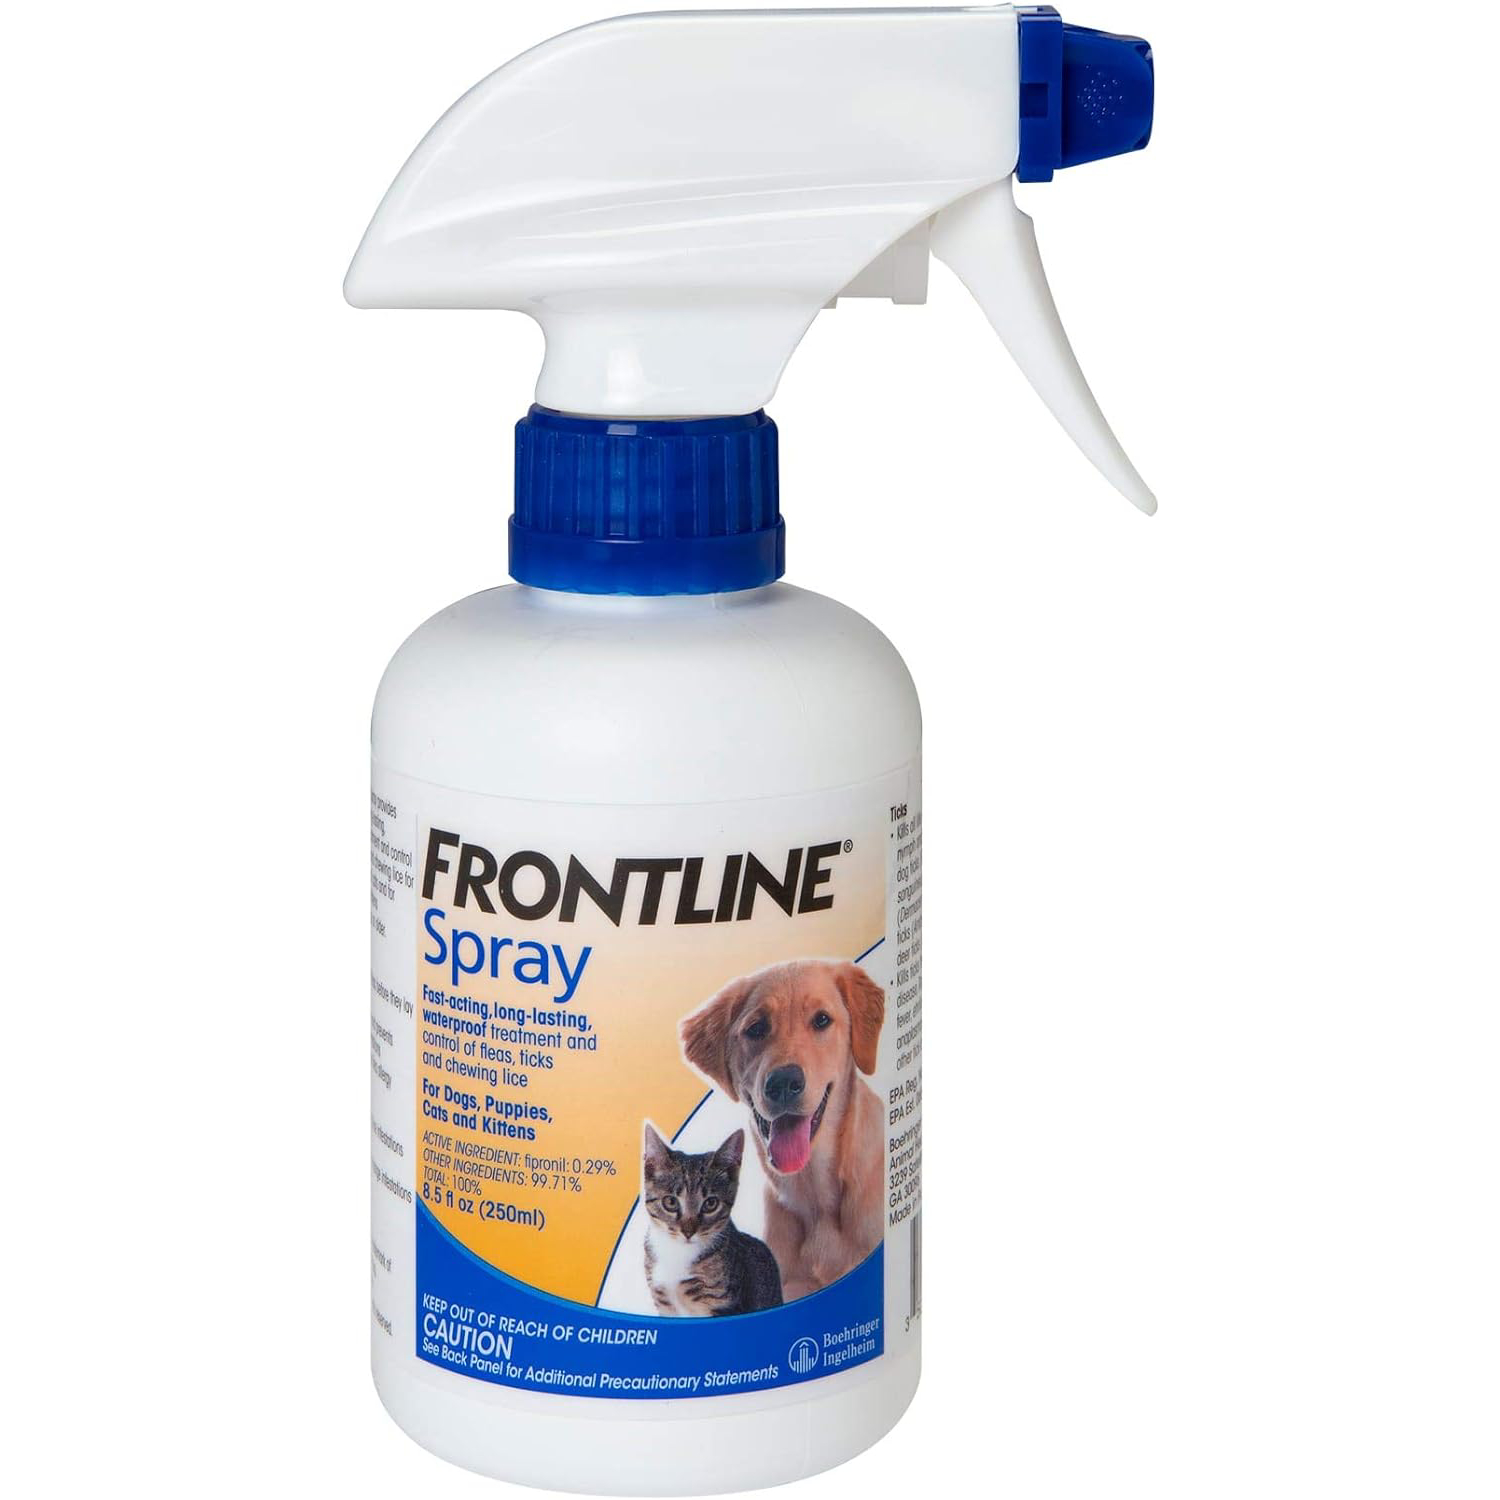 Frontline Flea & Ticks Spray for Dogs and Cats